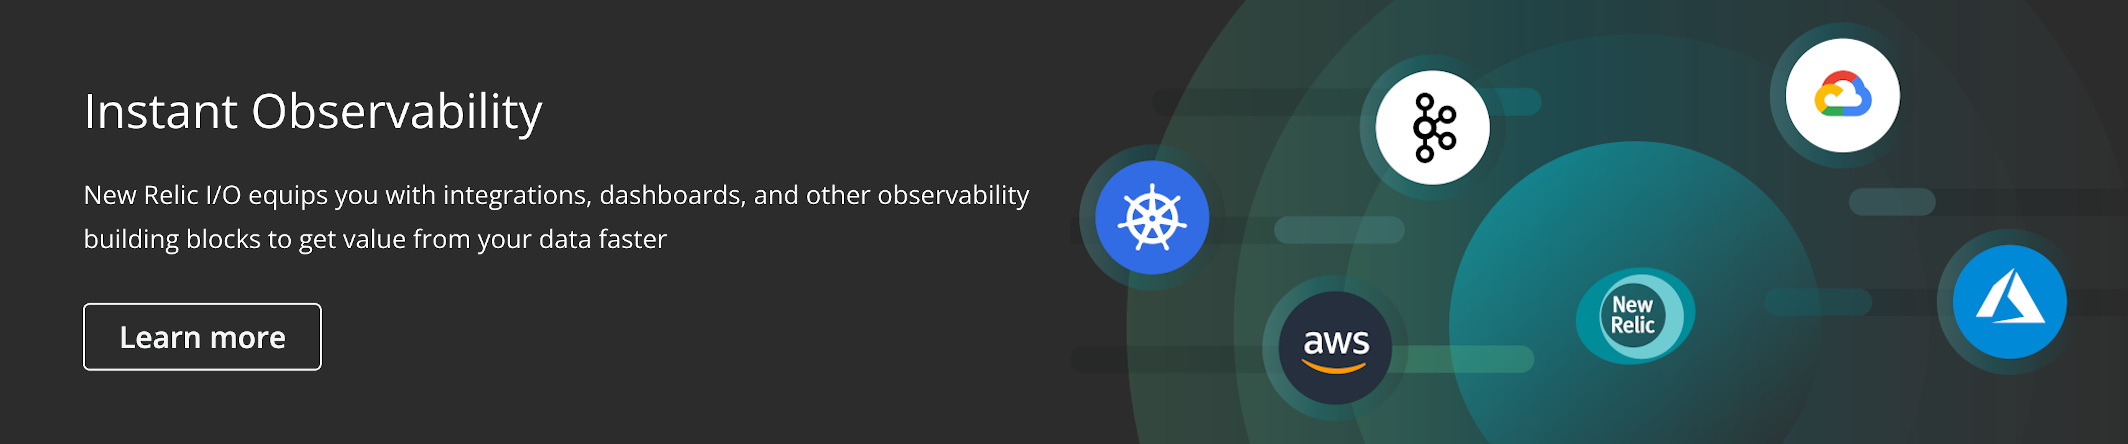 Get started with New Relic Instant Observability.